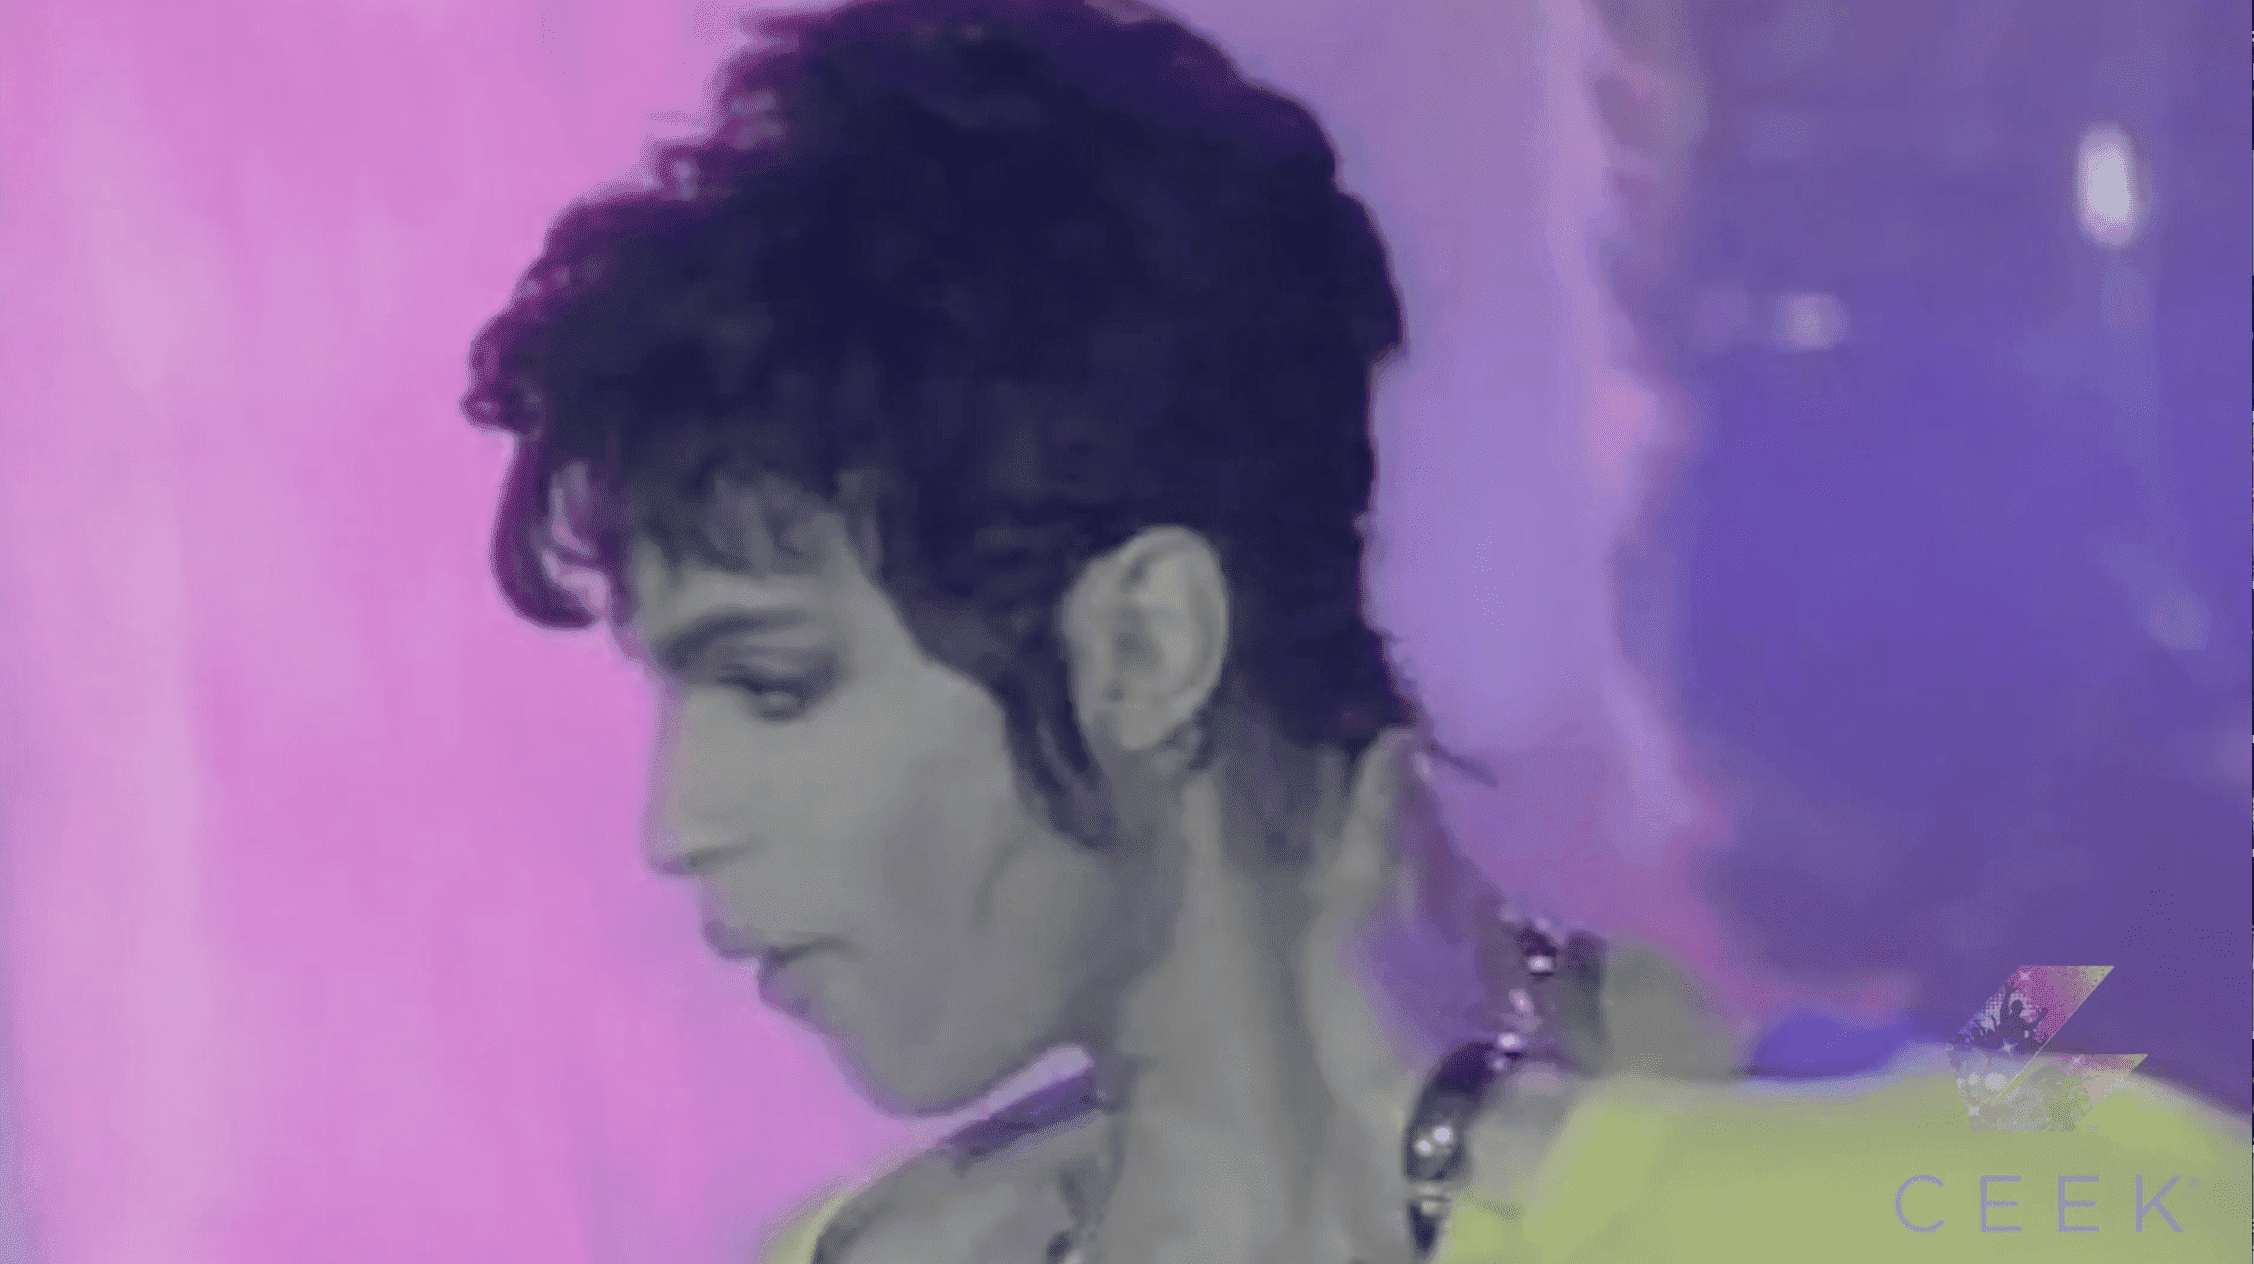 Prince Performs The Most Beautiful Girl In The World at the World Music Awards